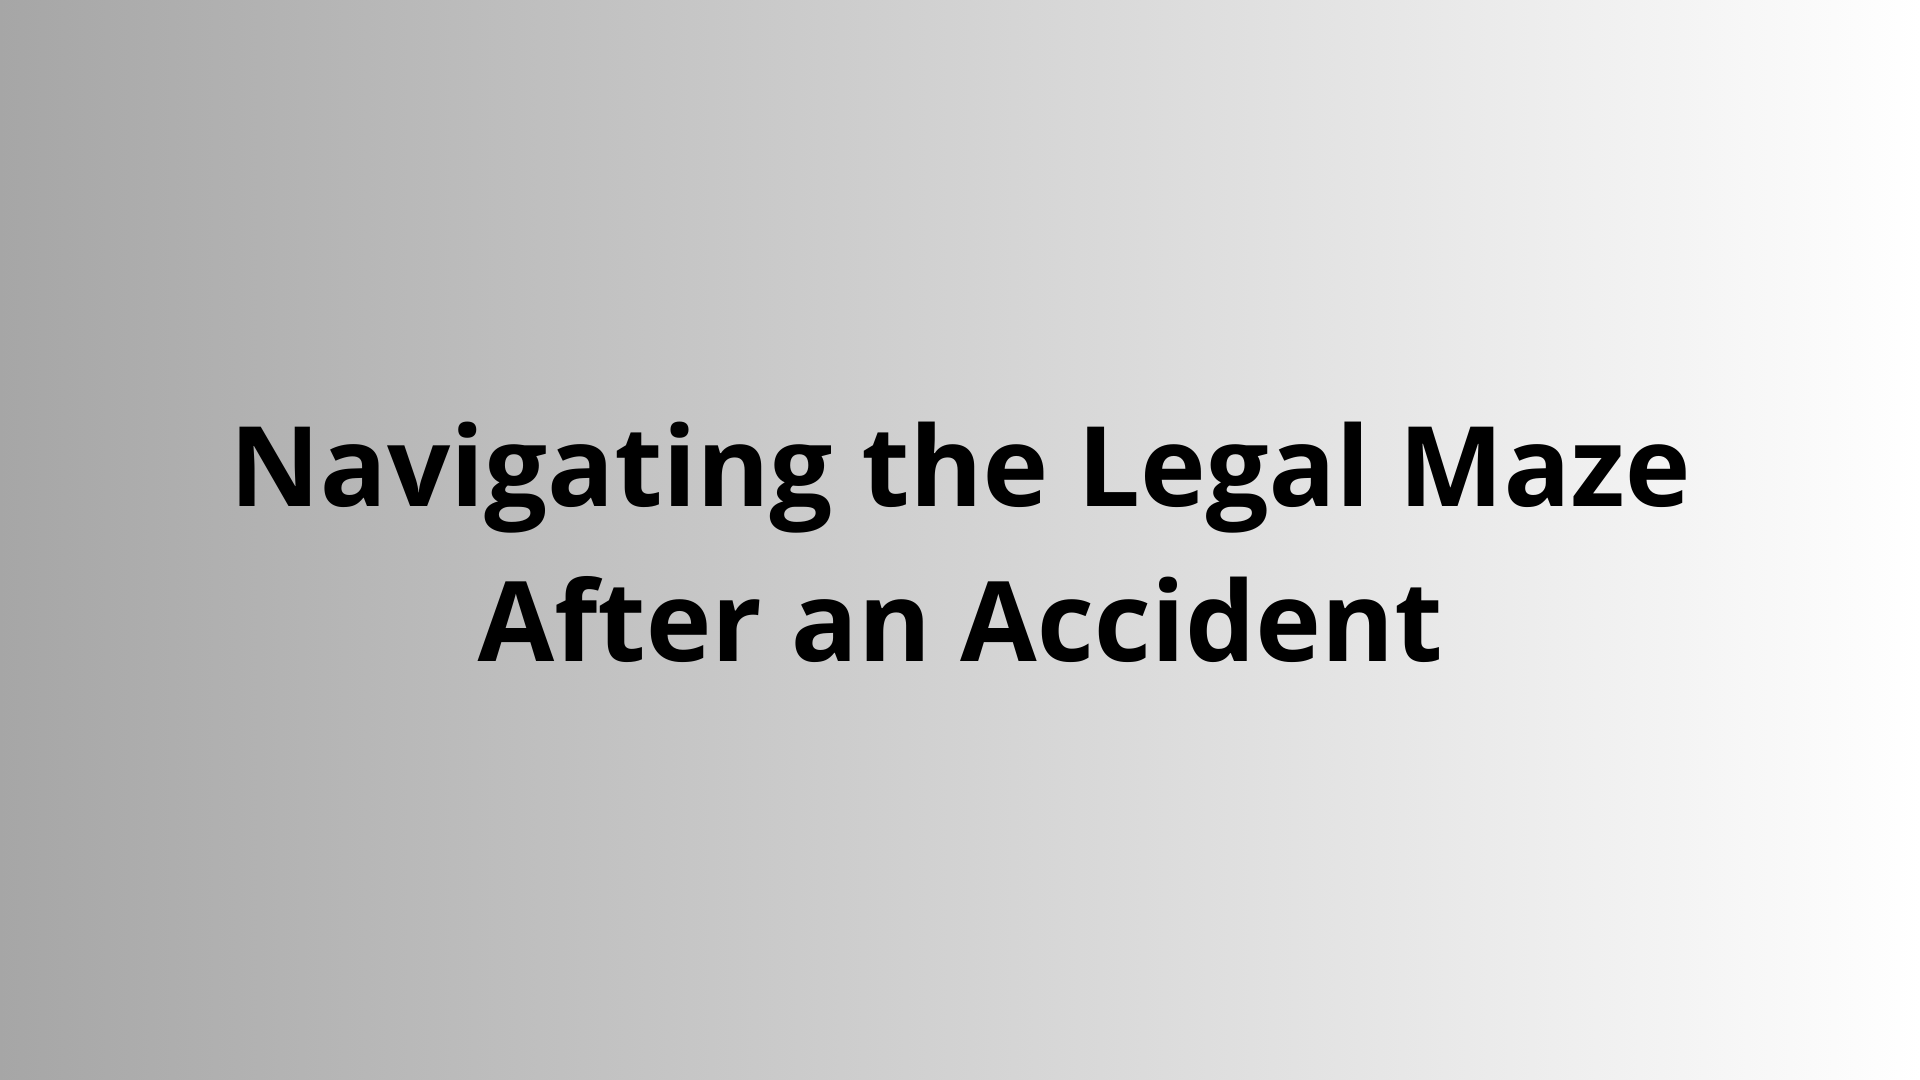 Navigating the Legal Maze After an Accident